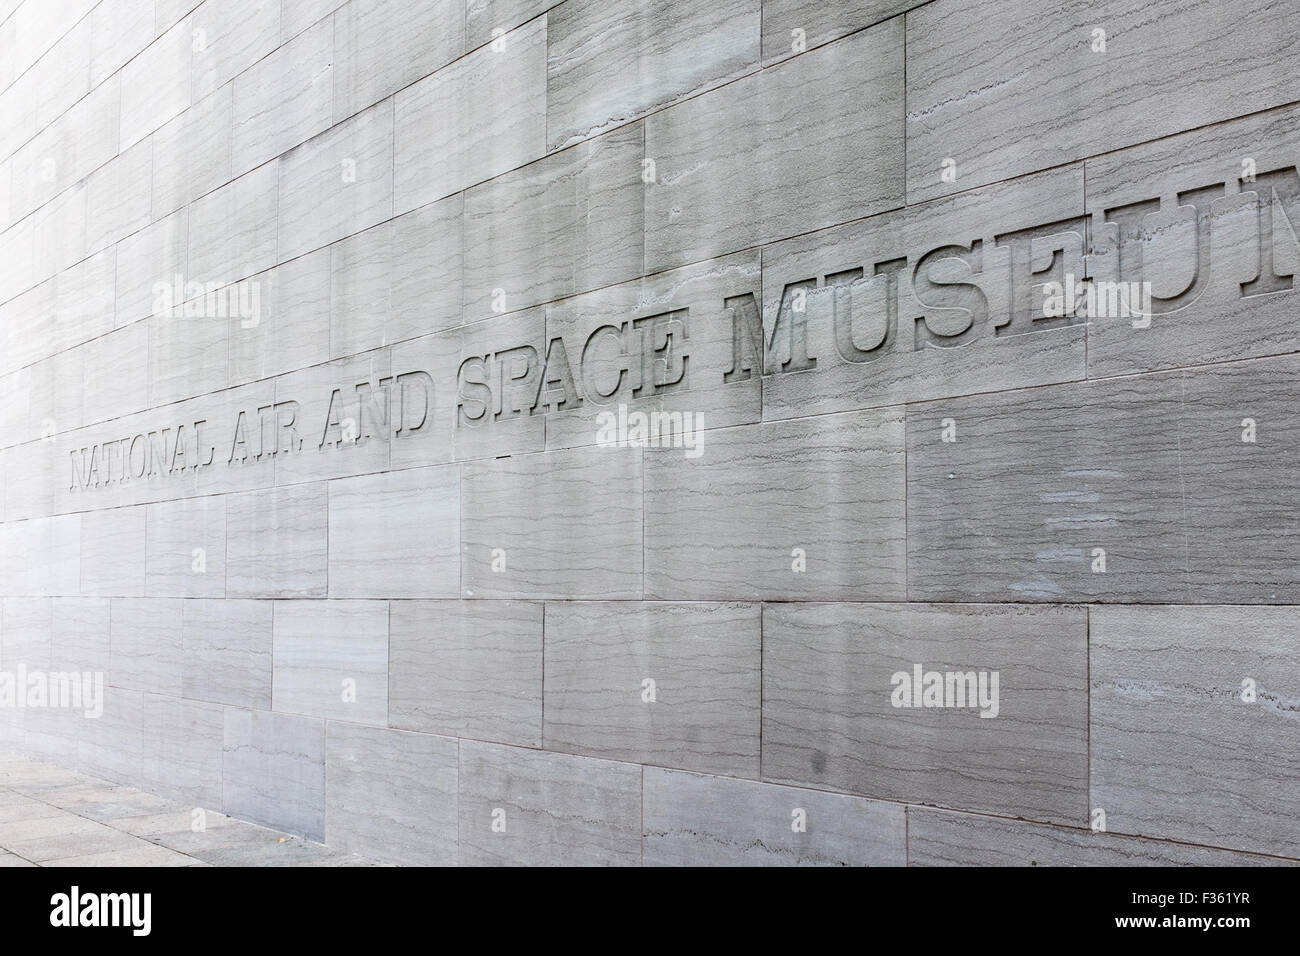 National Air and Space Museum sign etched on stone wall at the entrance Stock Photo